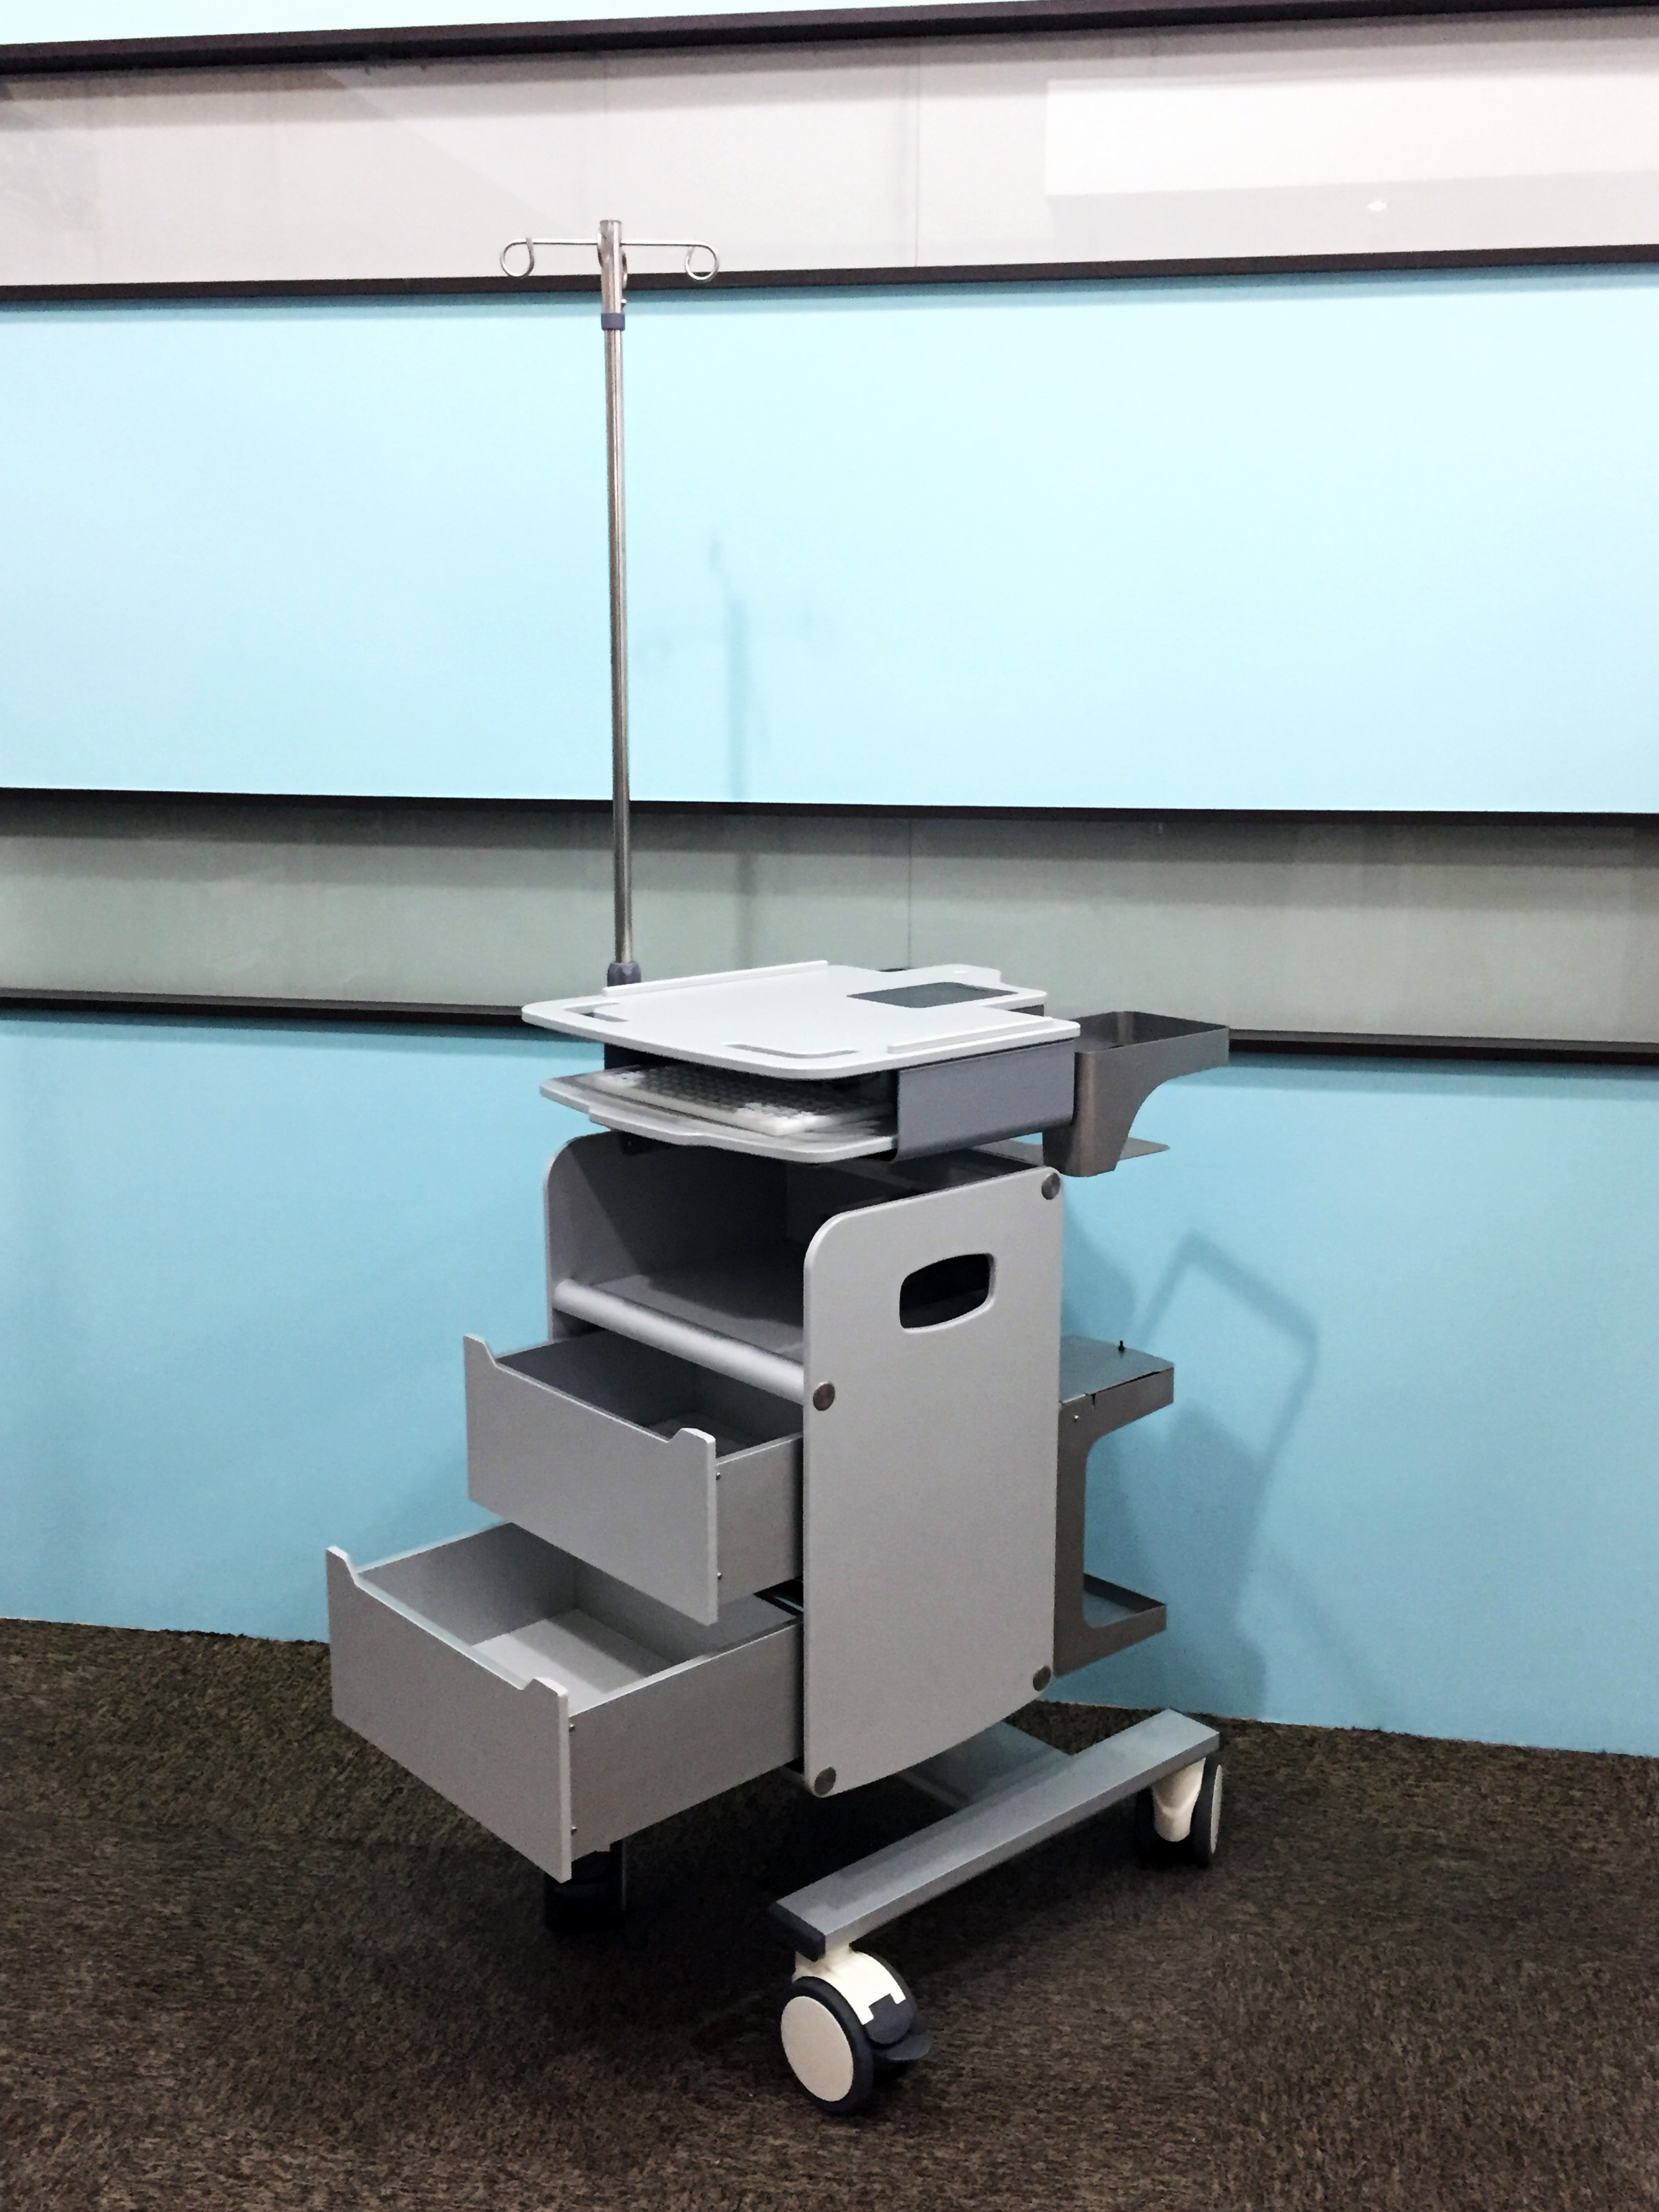 Version of the Phlebotomy work station which utilises stainless steel holders